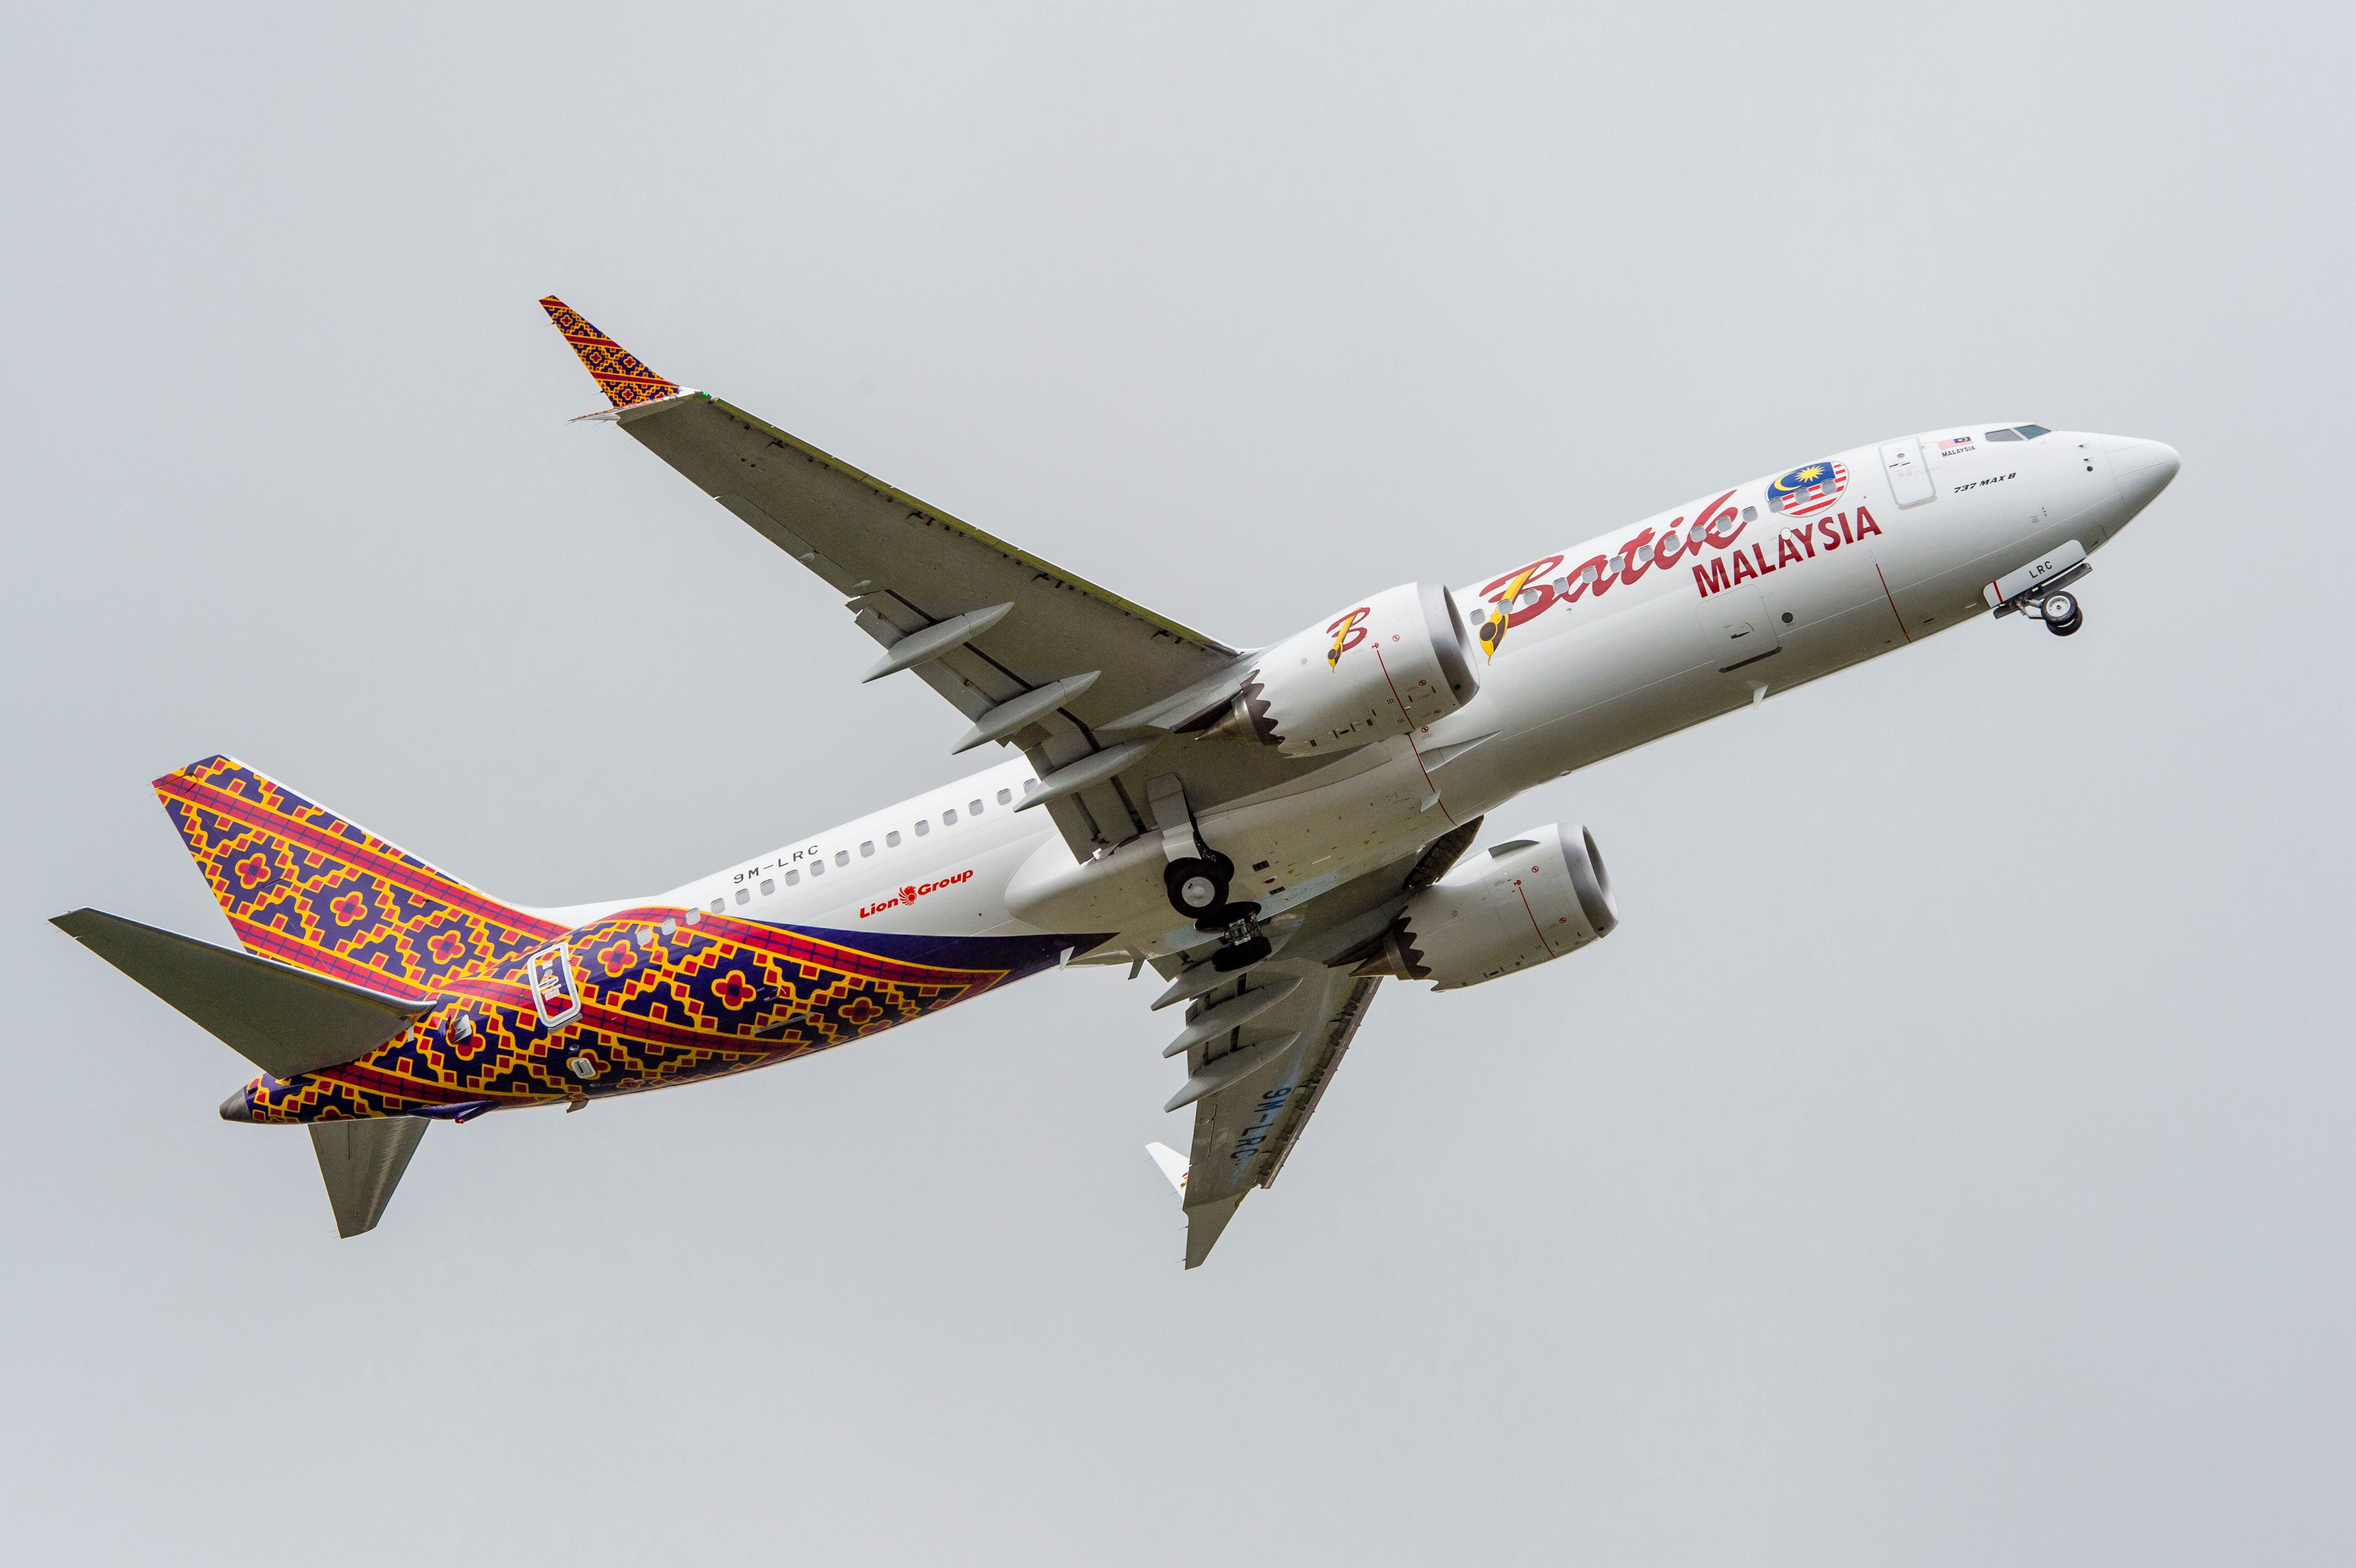 A Batik Air Malaysia Boeing 737 MAX 8 flying in the sky.